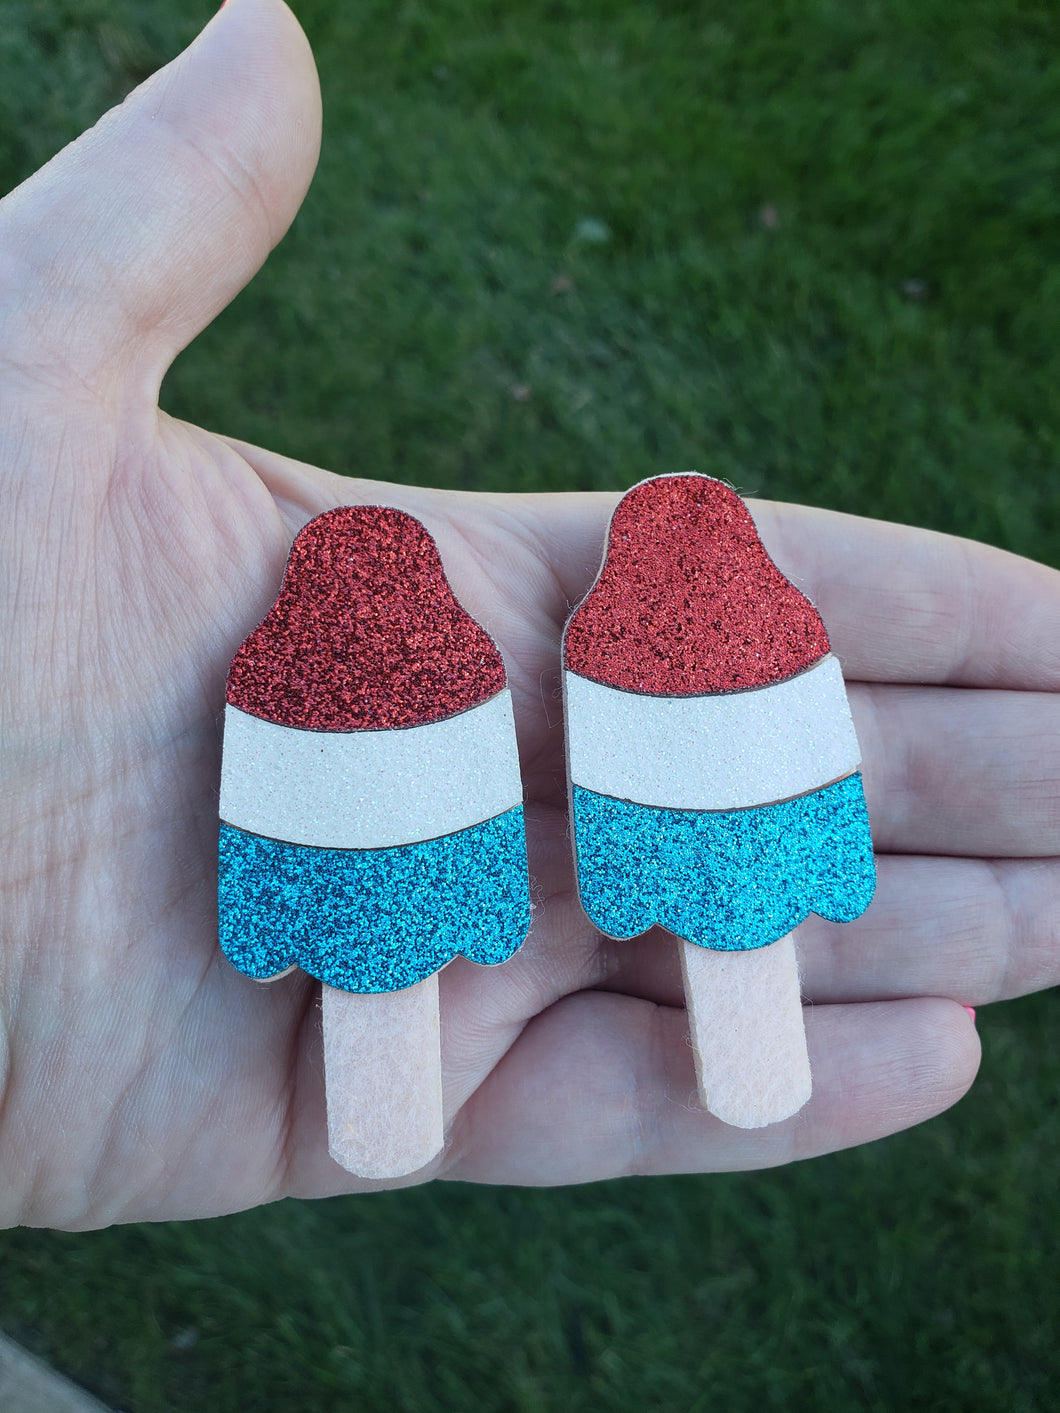 Faux Leather - Felt Hair Clips - Patriotic Popsicle  - Set of Two -  Red, White and Blue - 4th of July - Independence Day - USA- Hair Accessory  - Alligator Clip